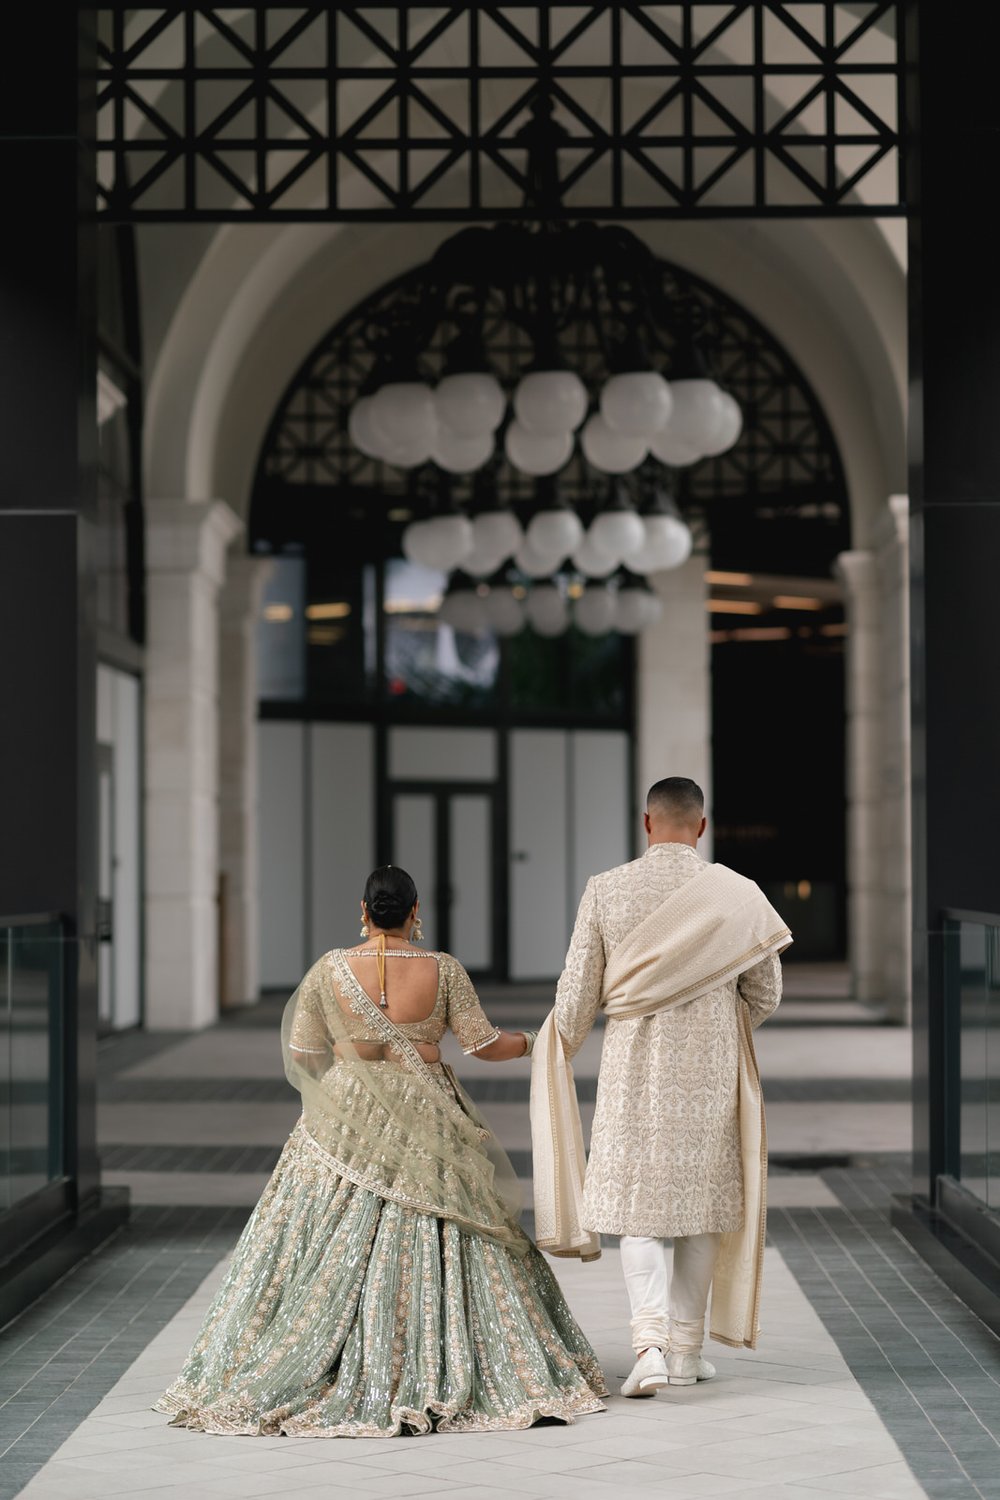 Luxury Indian Wedding in Miami Florida - Indian wedding photographer miami florida - michelle gonzalez photography - loews hotel in coral gables wedding-27.jpg